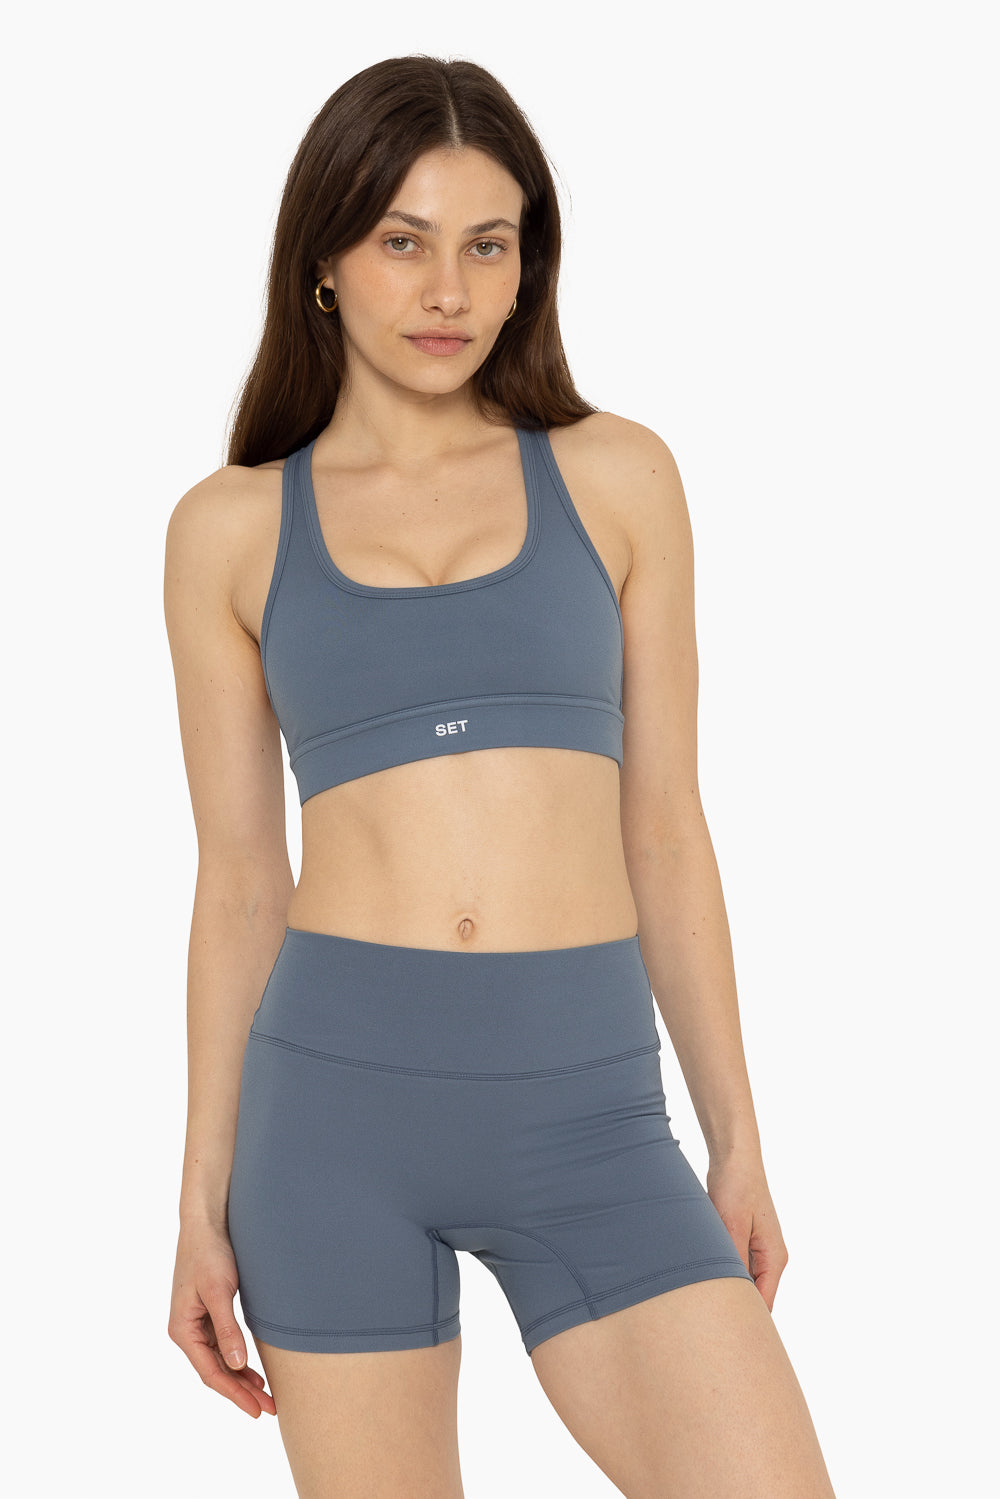 FORMCLOUD™ RACER BACK BRA - MINERAL Featured Image